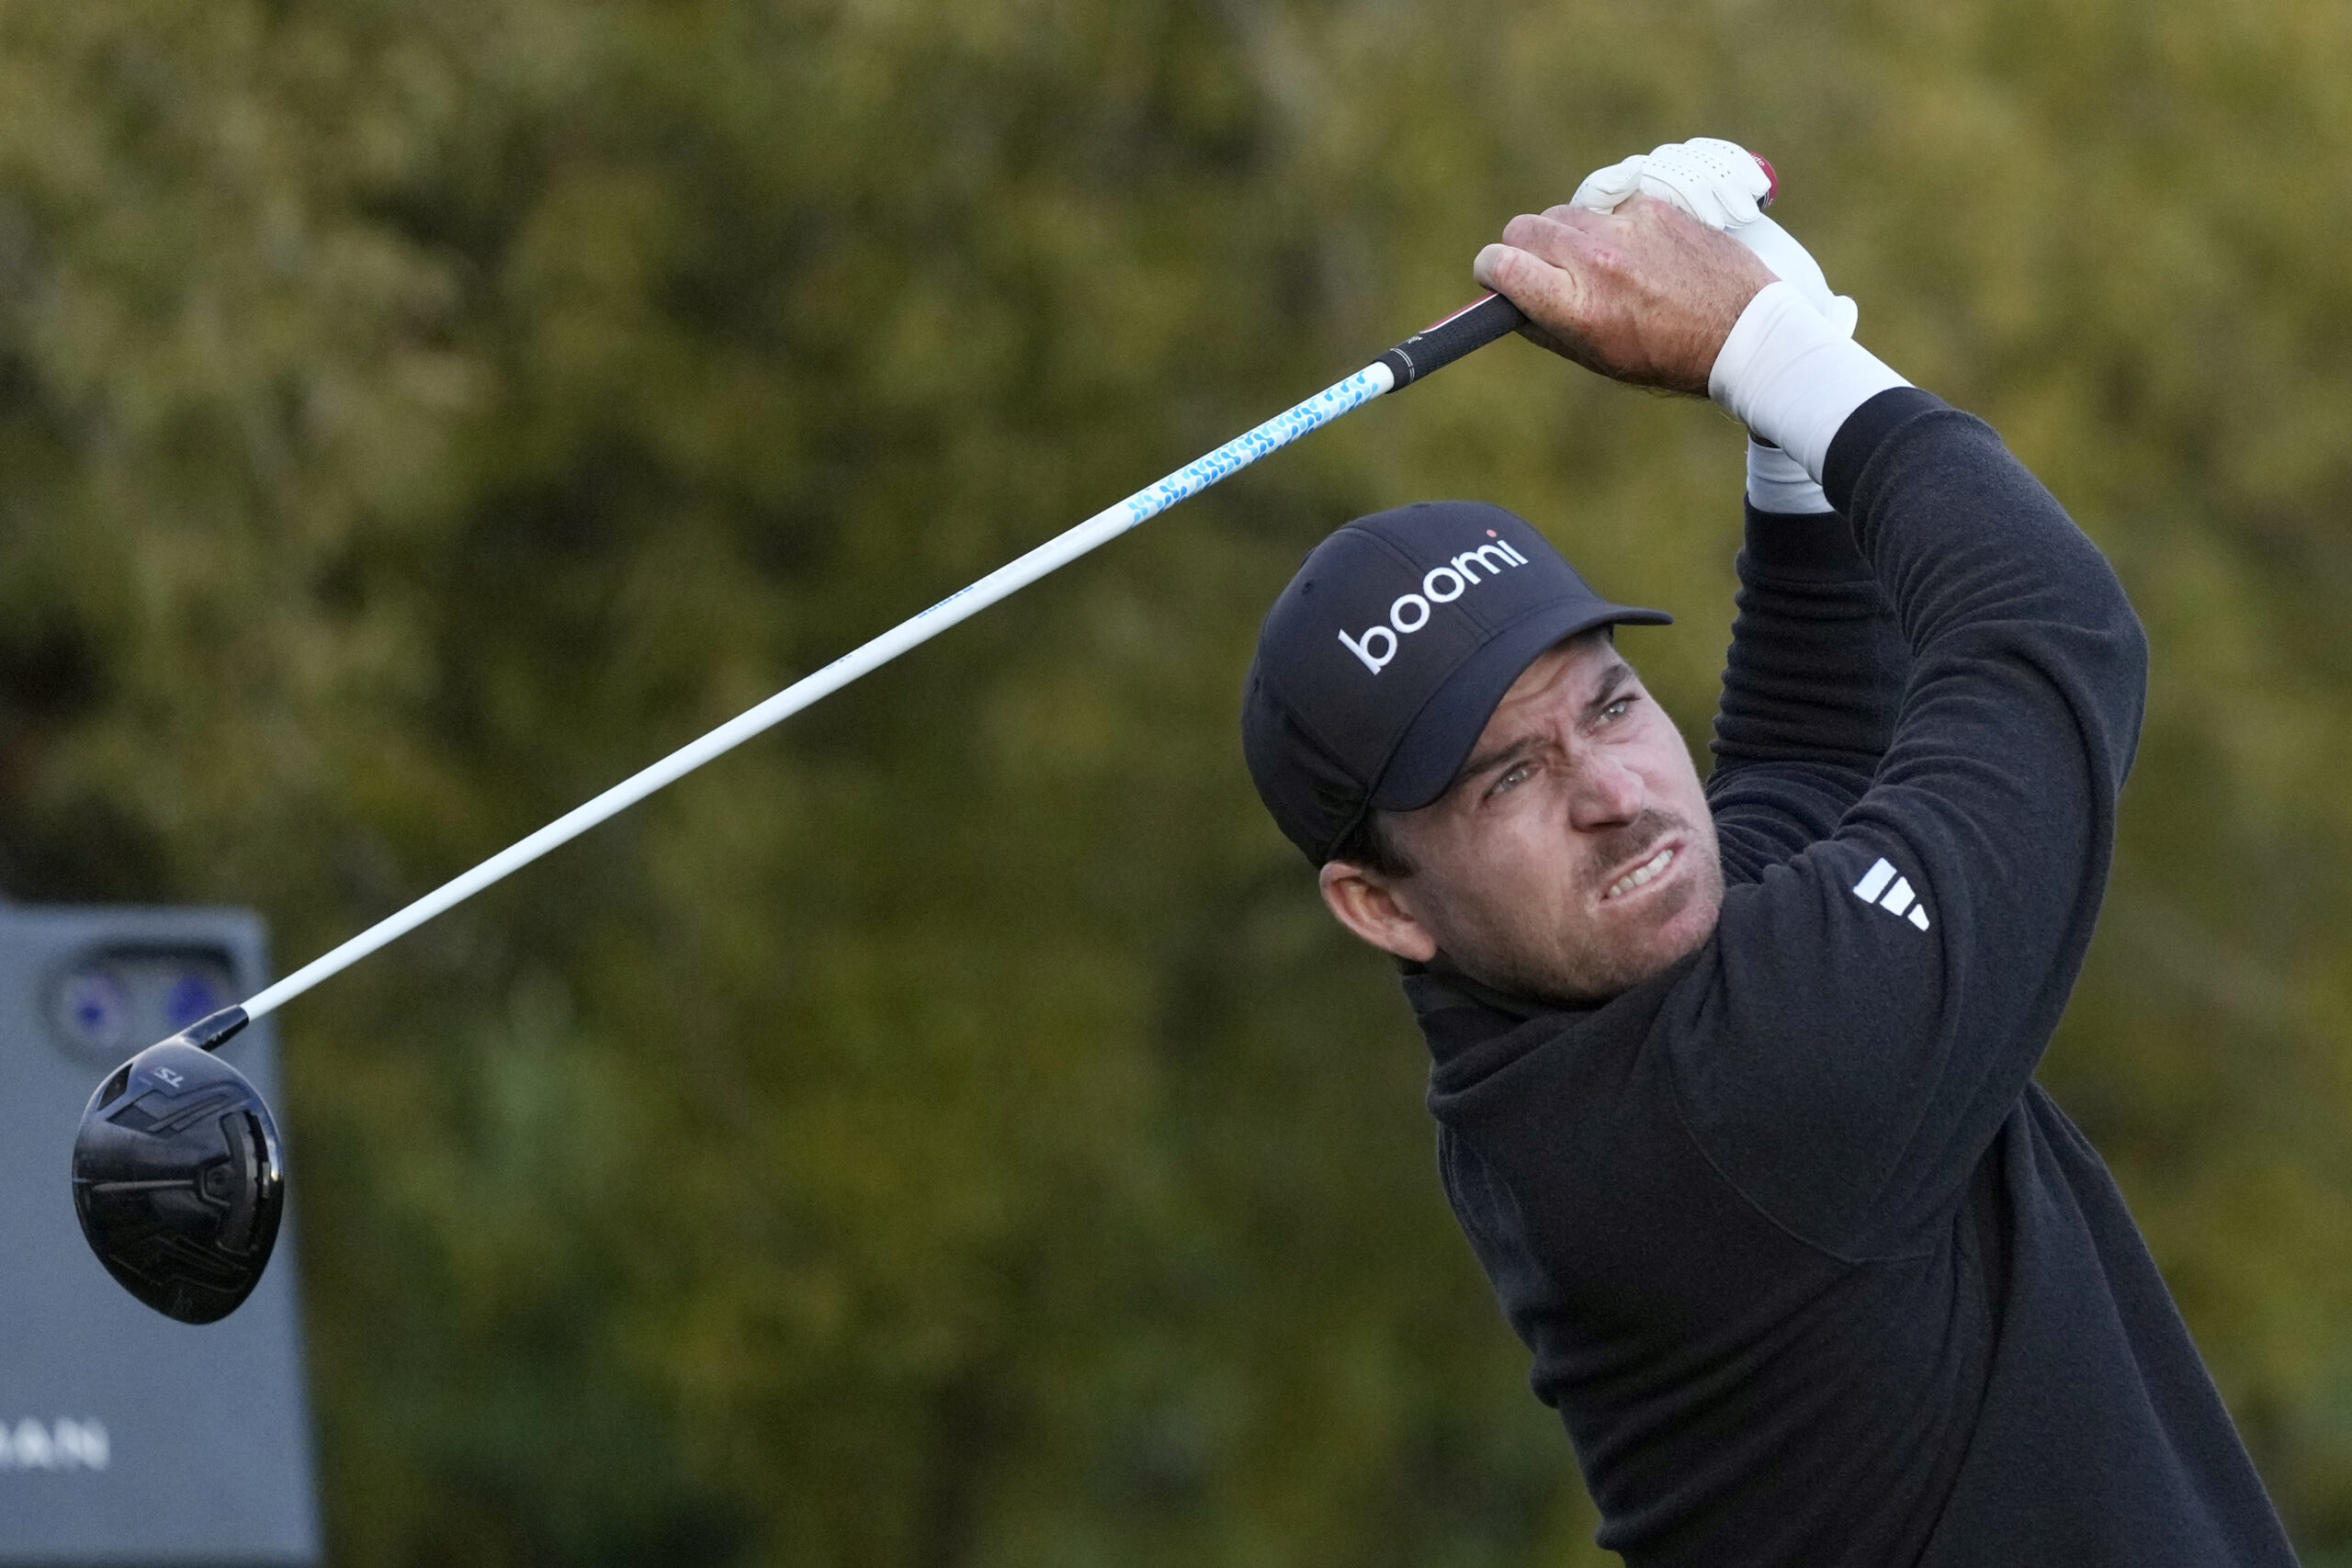  Nick Taylor takes 1-shot lead at Phoenix Open 